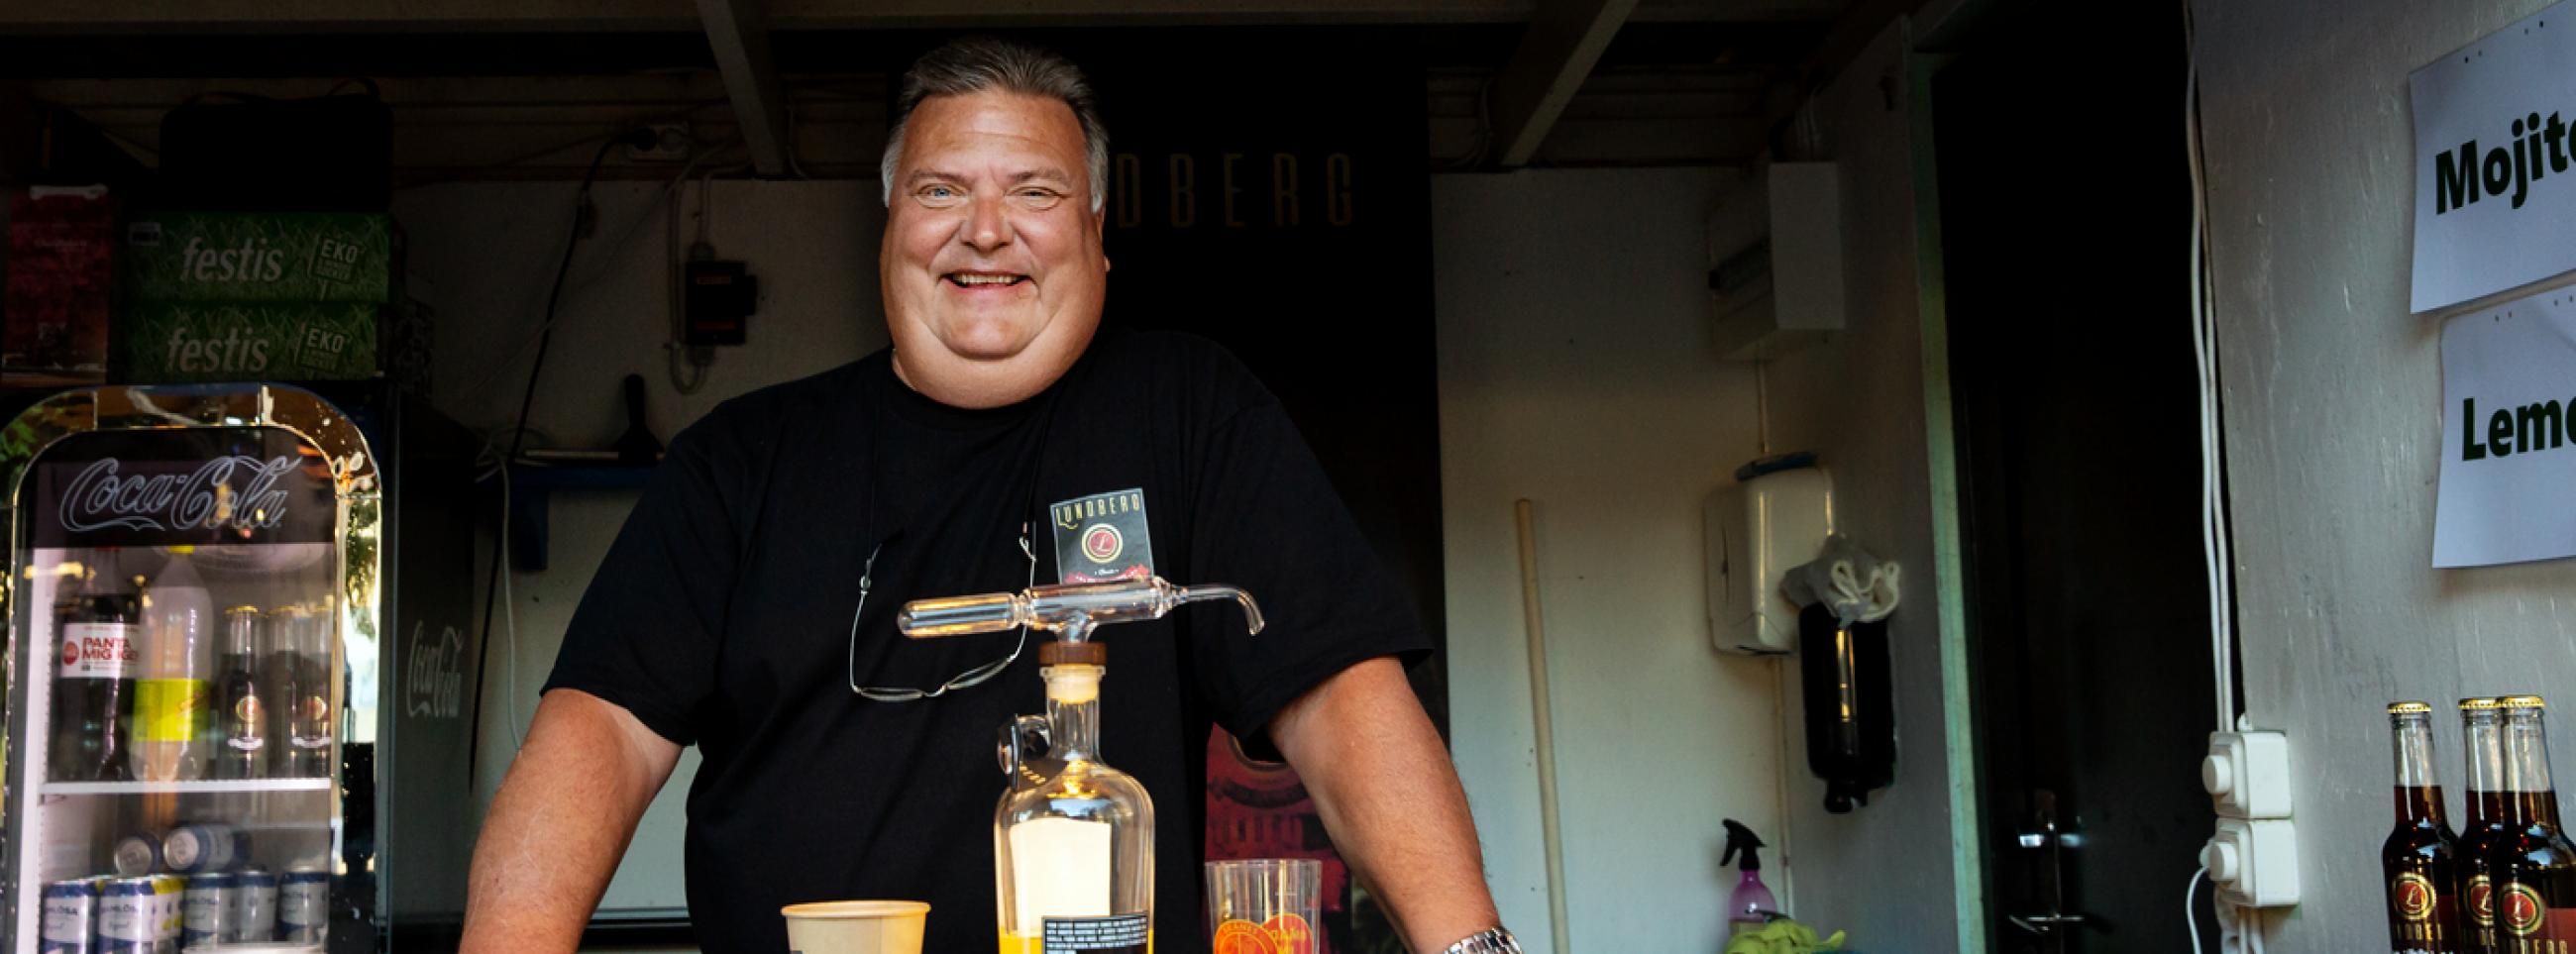 Big smiling man stands behind taps in a bar truck